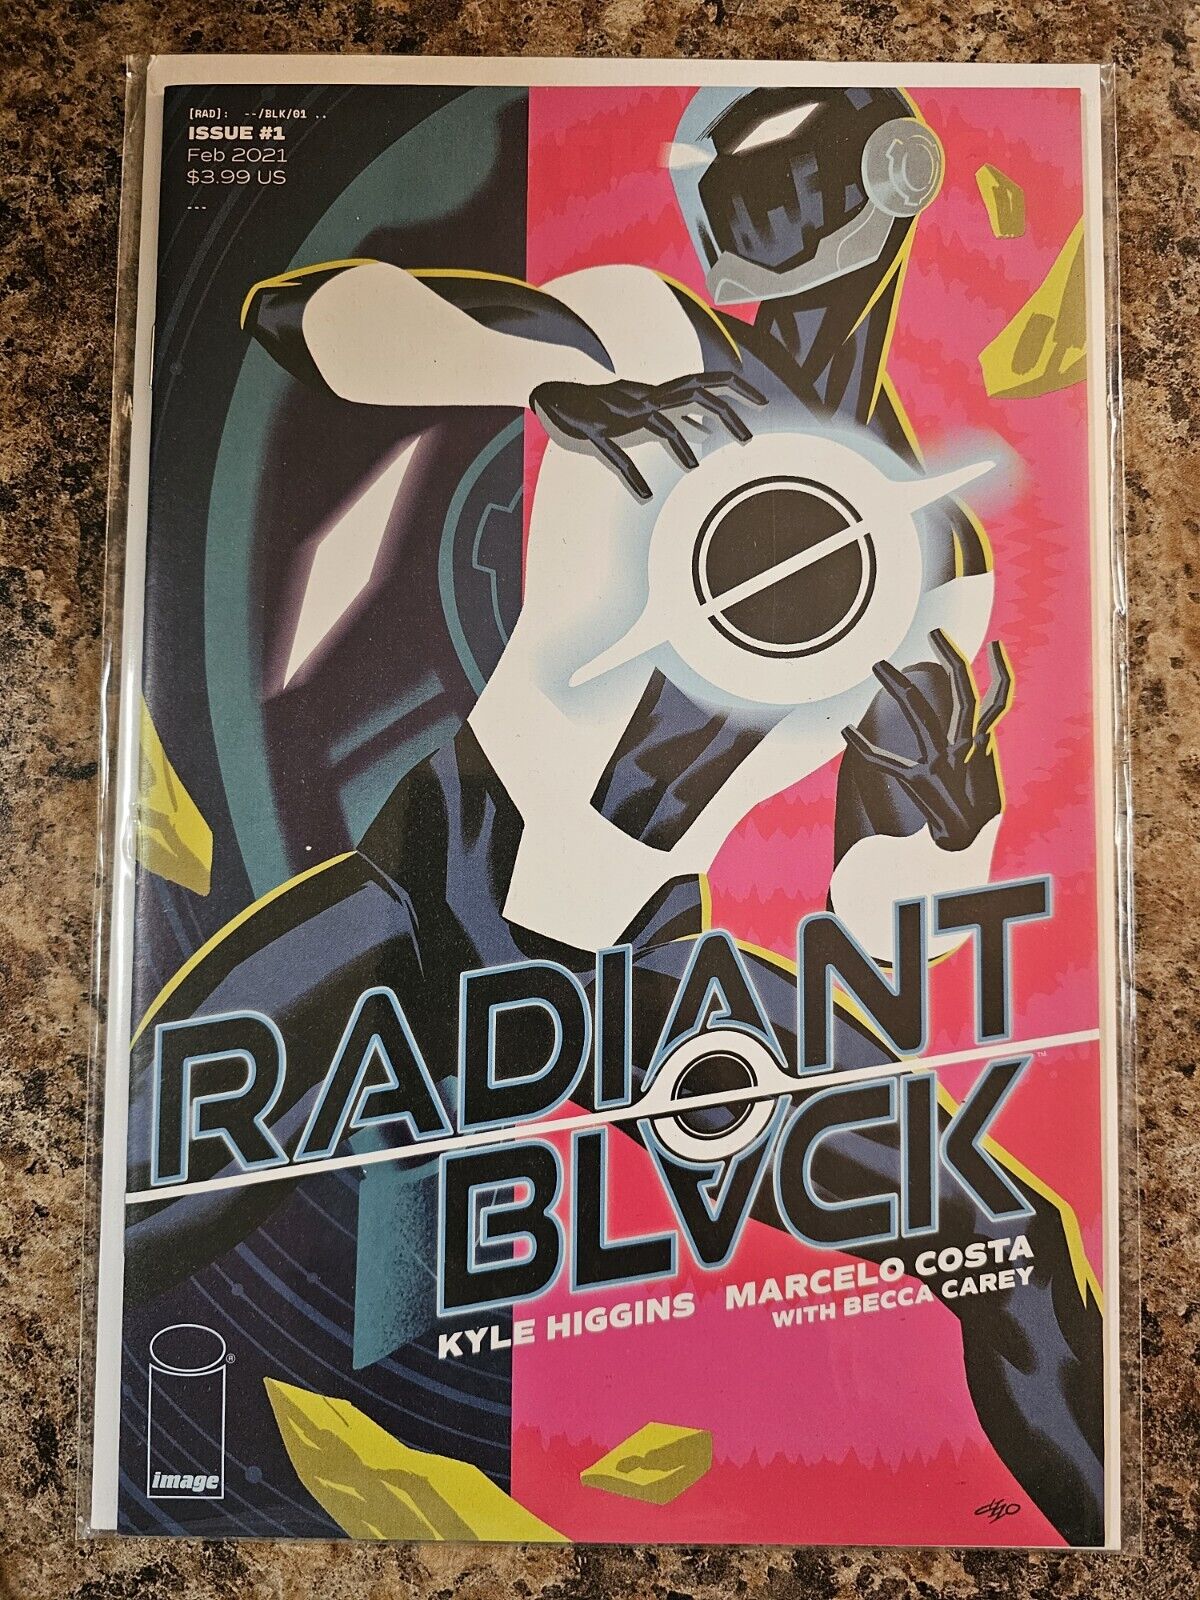 Radiant Black #1 (2021) Mike Cho Cover A Image Comics VF-NM 